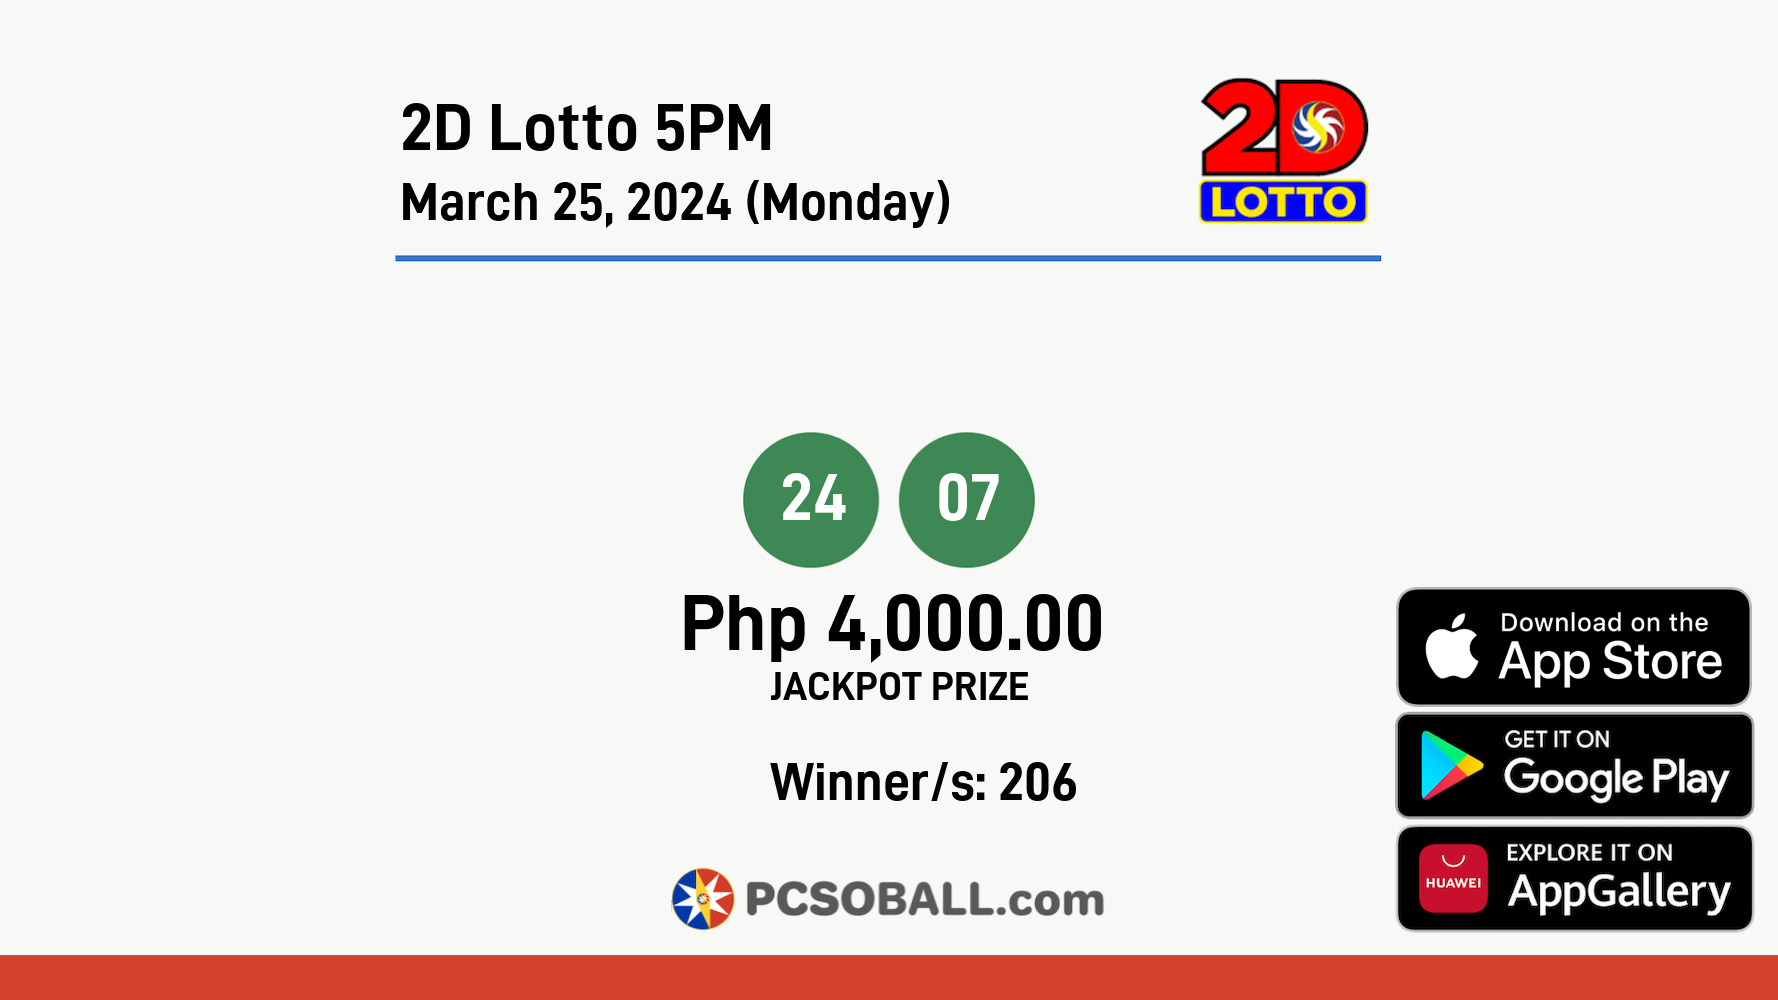 2D Lotto 5PM March 25, 2024 (Monday) Result